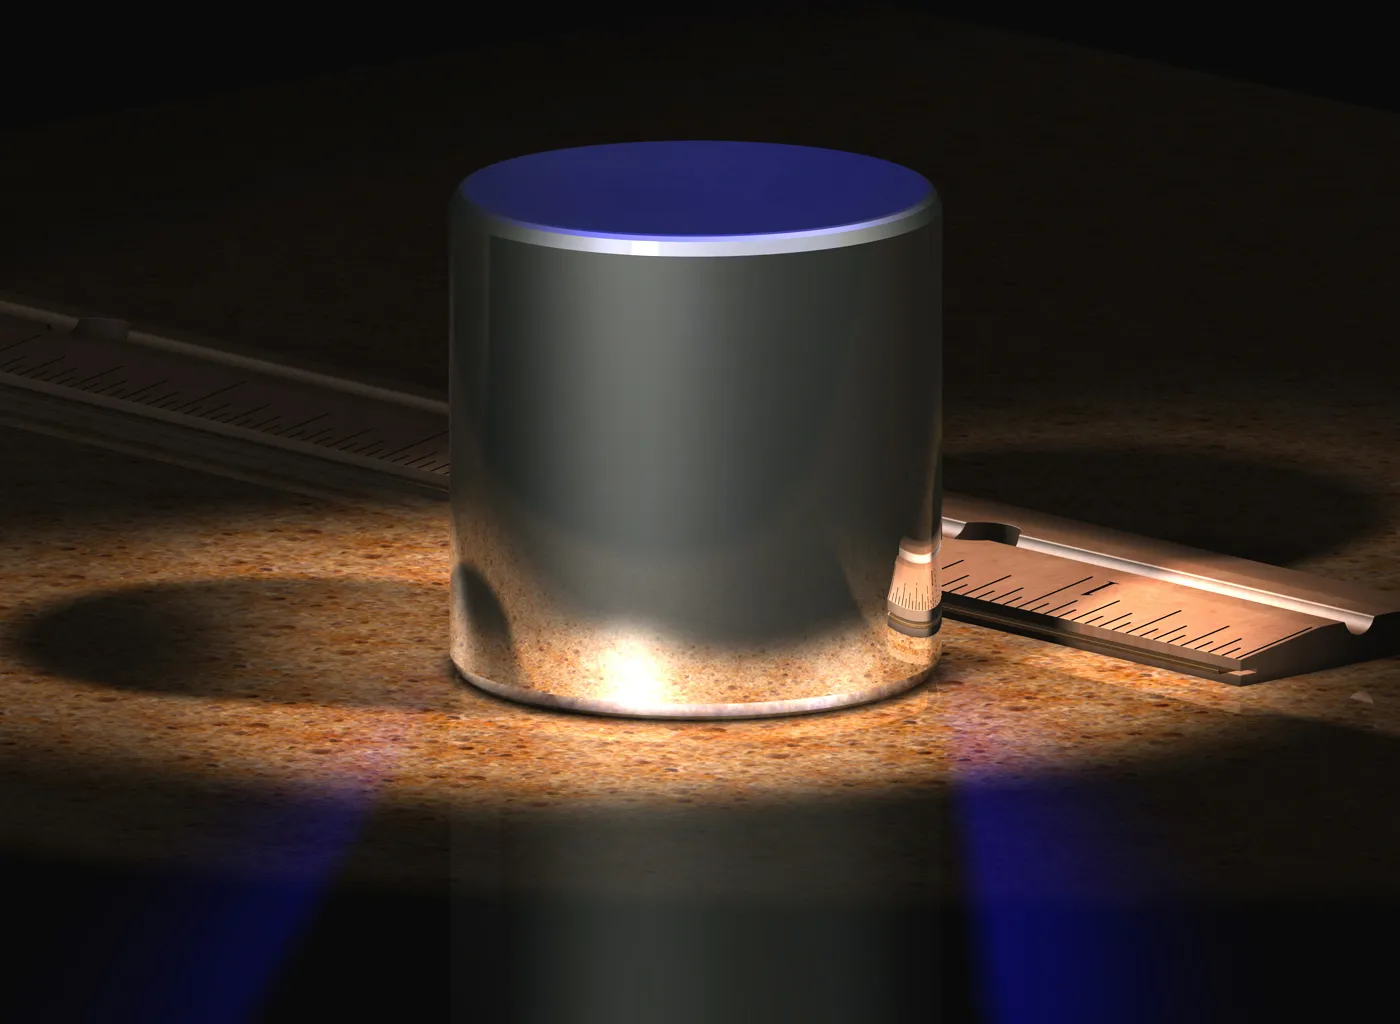 Photo showing: A computer-generated image of the International Prototype kilogram (IPK), which is made from an alloy of 90% platinum and 10% iridium (by weight) and machined into a right-circular cylinder (height = diameter) of 39.17 mm. The IPK is kept at the Bureau International des Poids et Mesures (International Bureau of Weights and Measures) in Sèvres on the outskirts of Paris.
The geometry of this computer model was based on the actual specifications being used for experiments in new manufacturing techniques to produce new kilogram mass standards.
Solid model and ray-traced image was created using Cobalt CAD software.
This image was provided by the contributor because of the dearth of uncopyrighted photographs of the actual IPK. This is expected to be a chronic limitation given that…

the IPK is stored in a vault nearly all the time,
there is no general public access to the BIPM (and certainly none to the vault),
and working copies of the IPK are used at the BIPM for routine calibrations for years on-end.